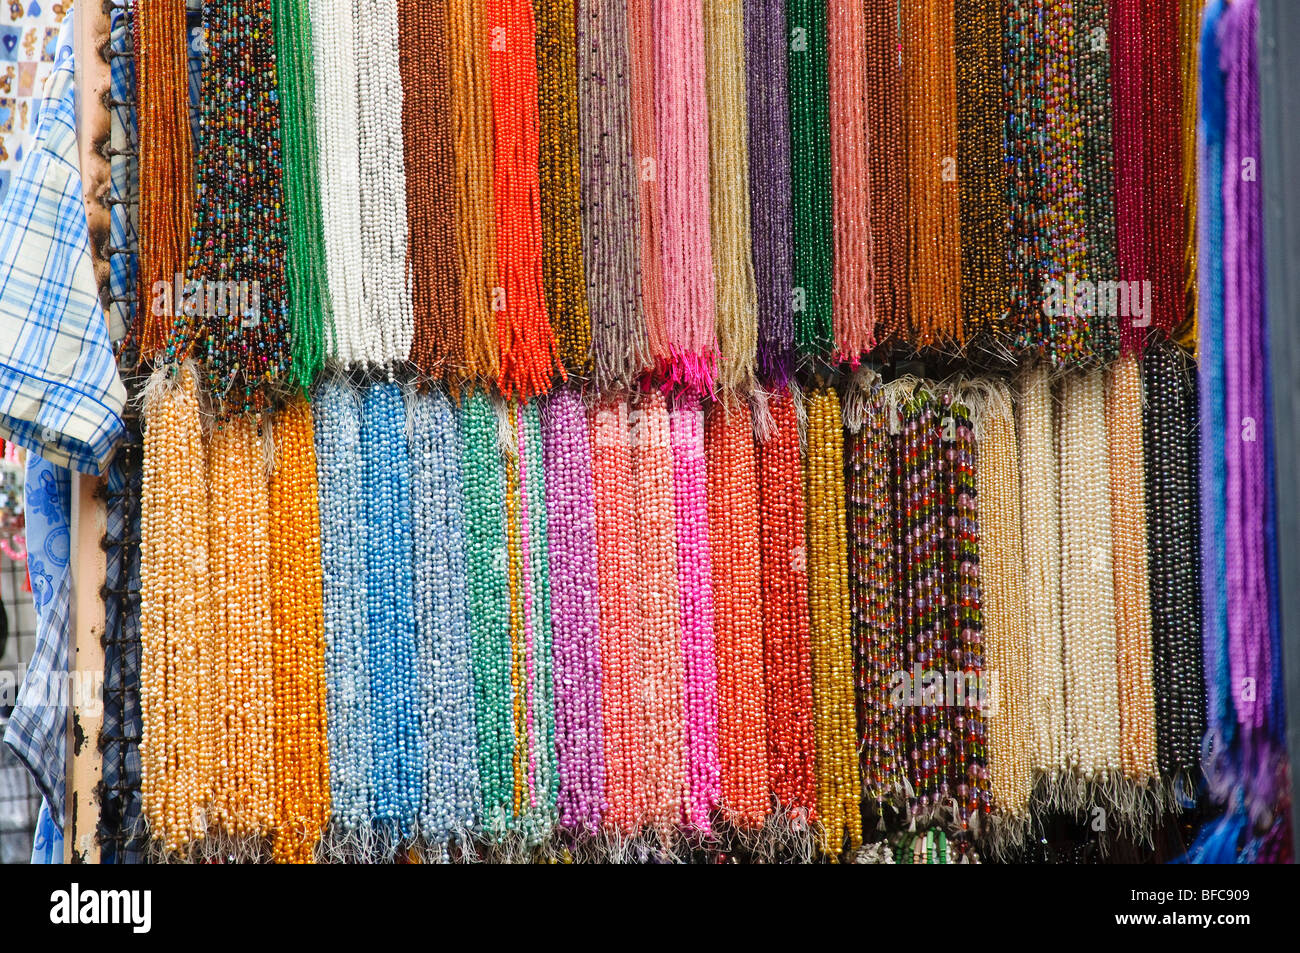 Beads, colored gems, pearls and stones for sale in Chinatown, Bangkok, Thailand Stock Photo